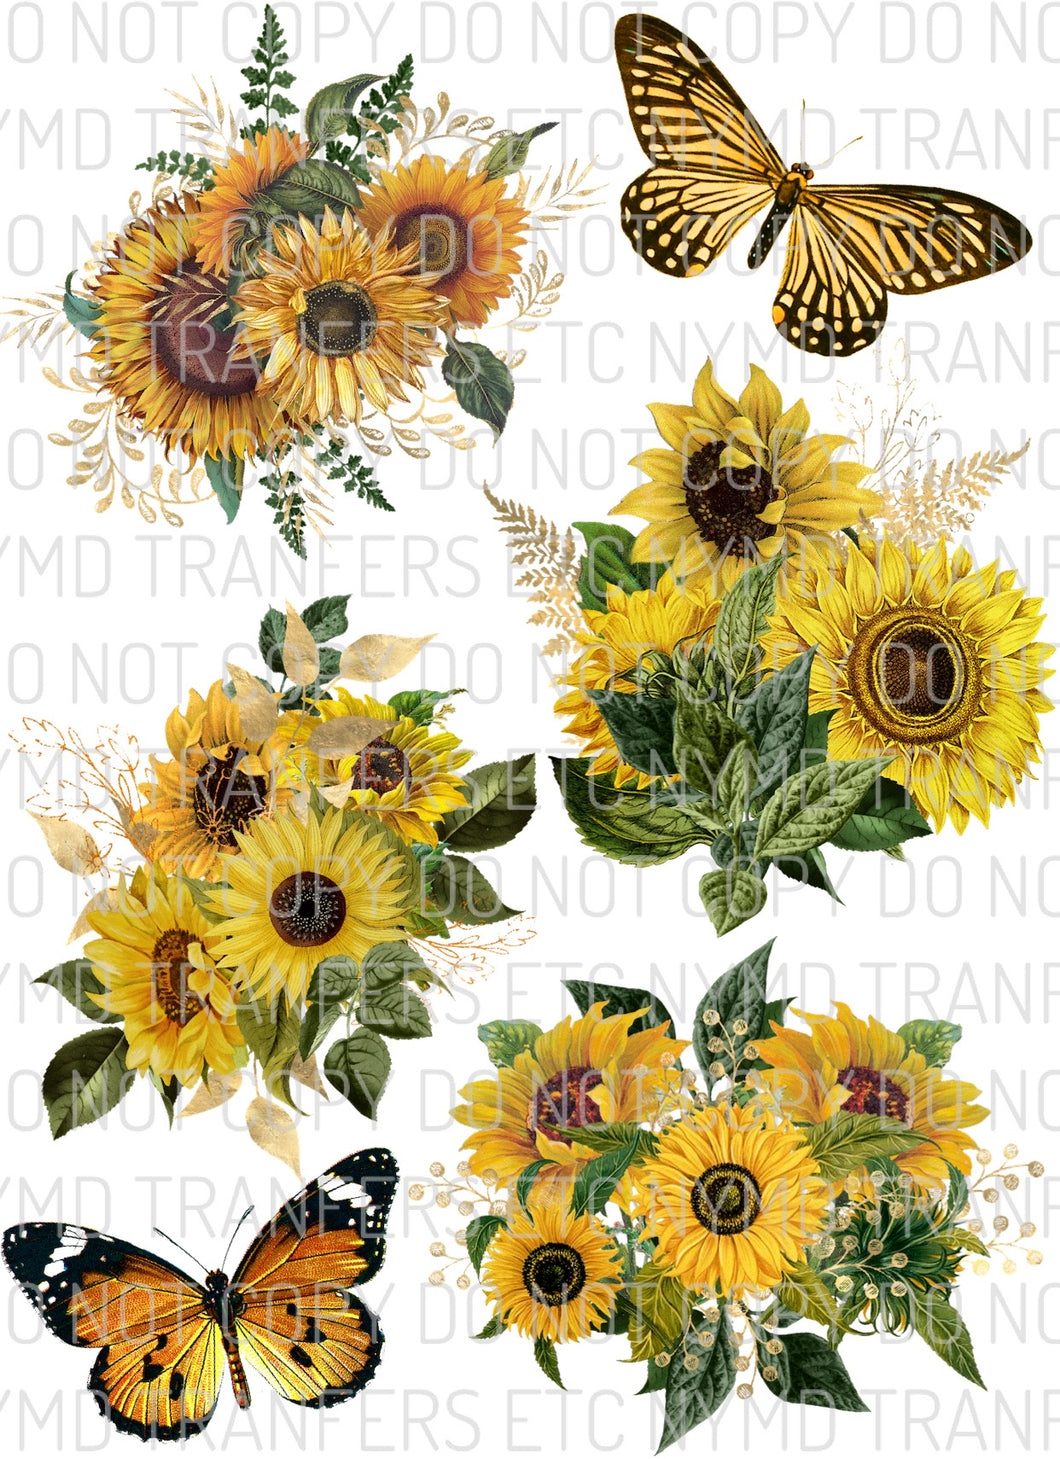 Sunflower Full Sheet 11x14” Ready To Press Sublimation Transfer